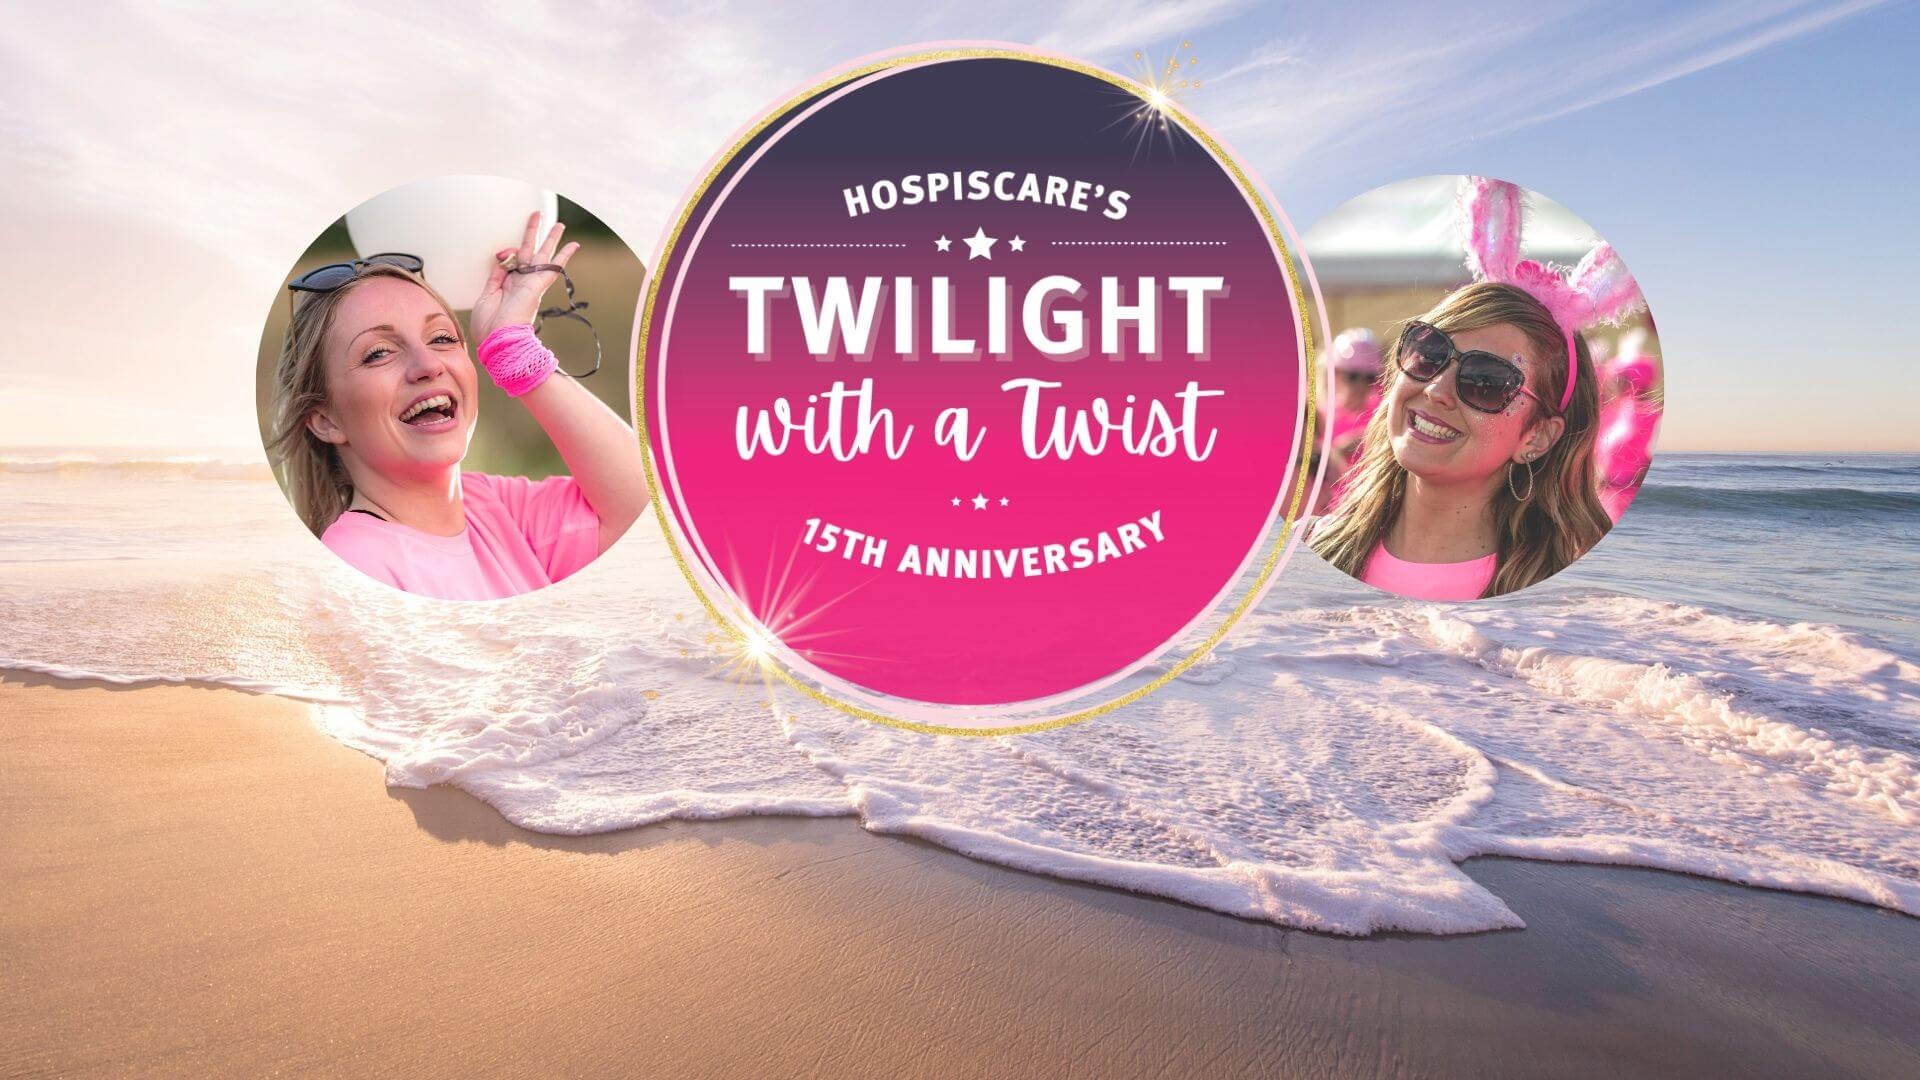 Twilight with a Twist: Terms & Conditions